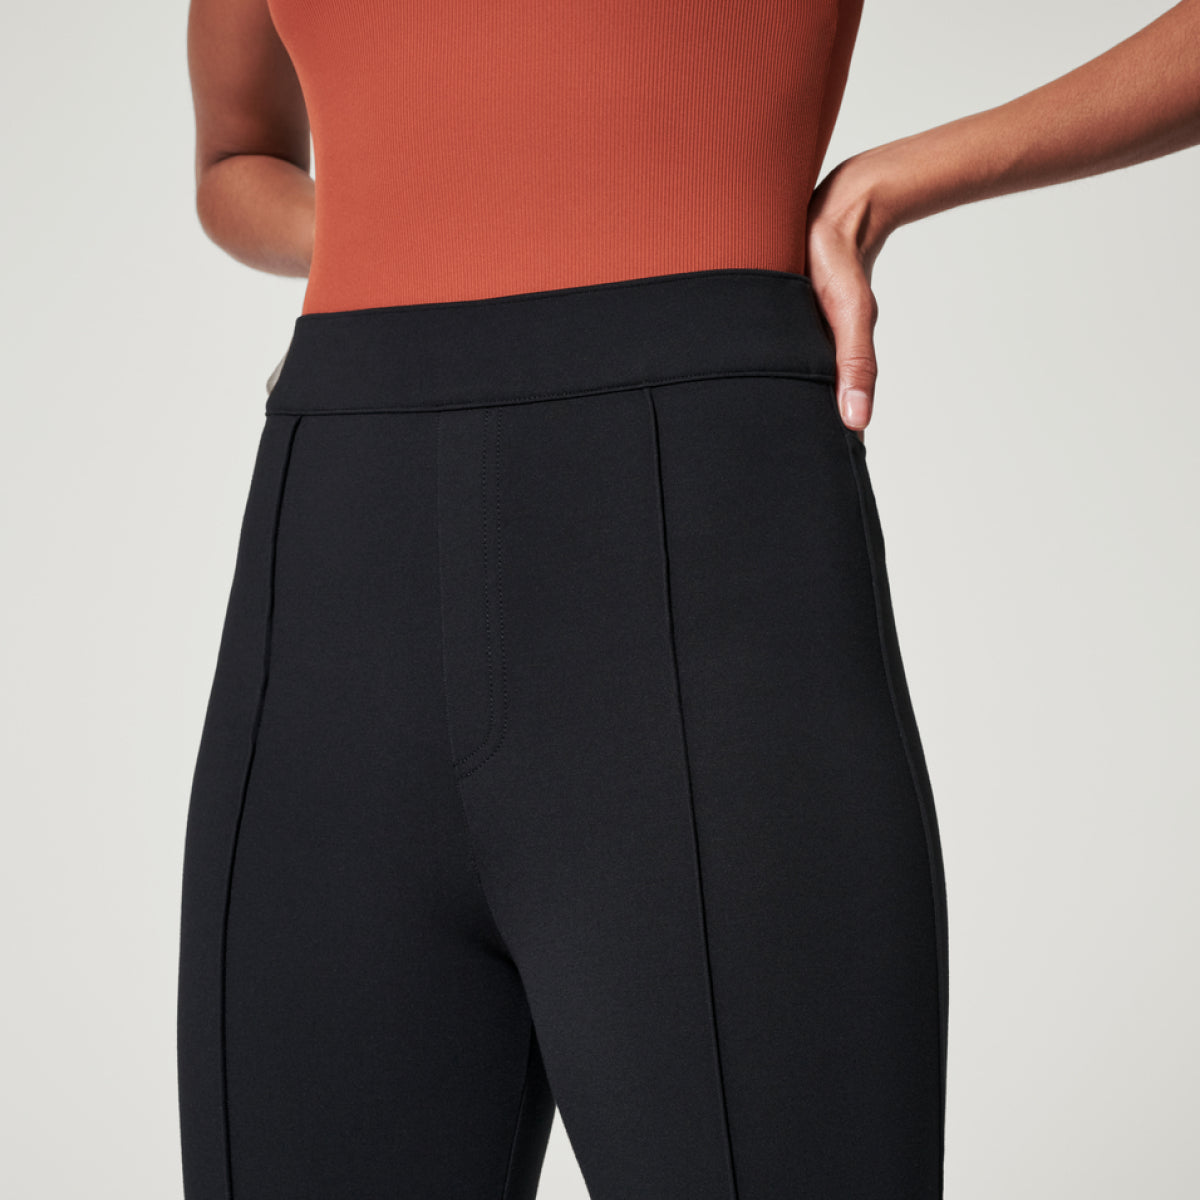 The Perfect Pant, High-Rise Flare Pants for Women